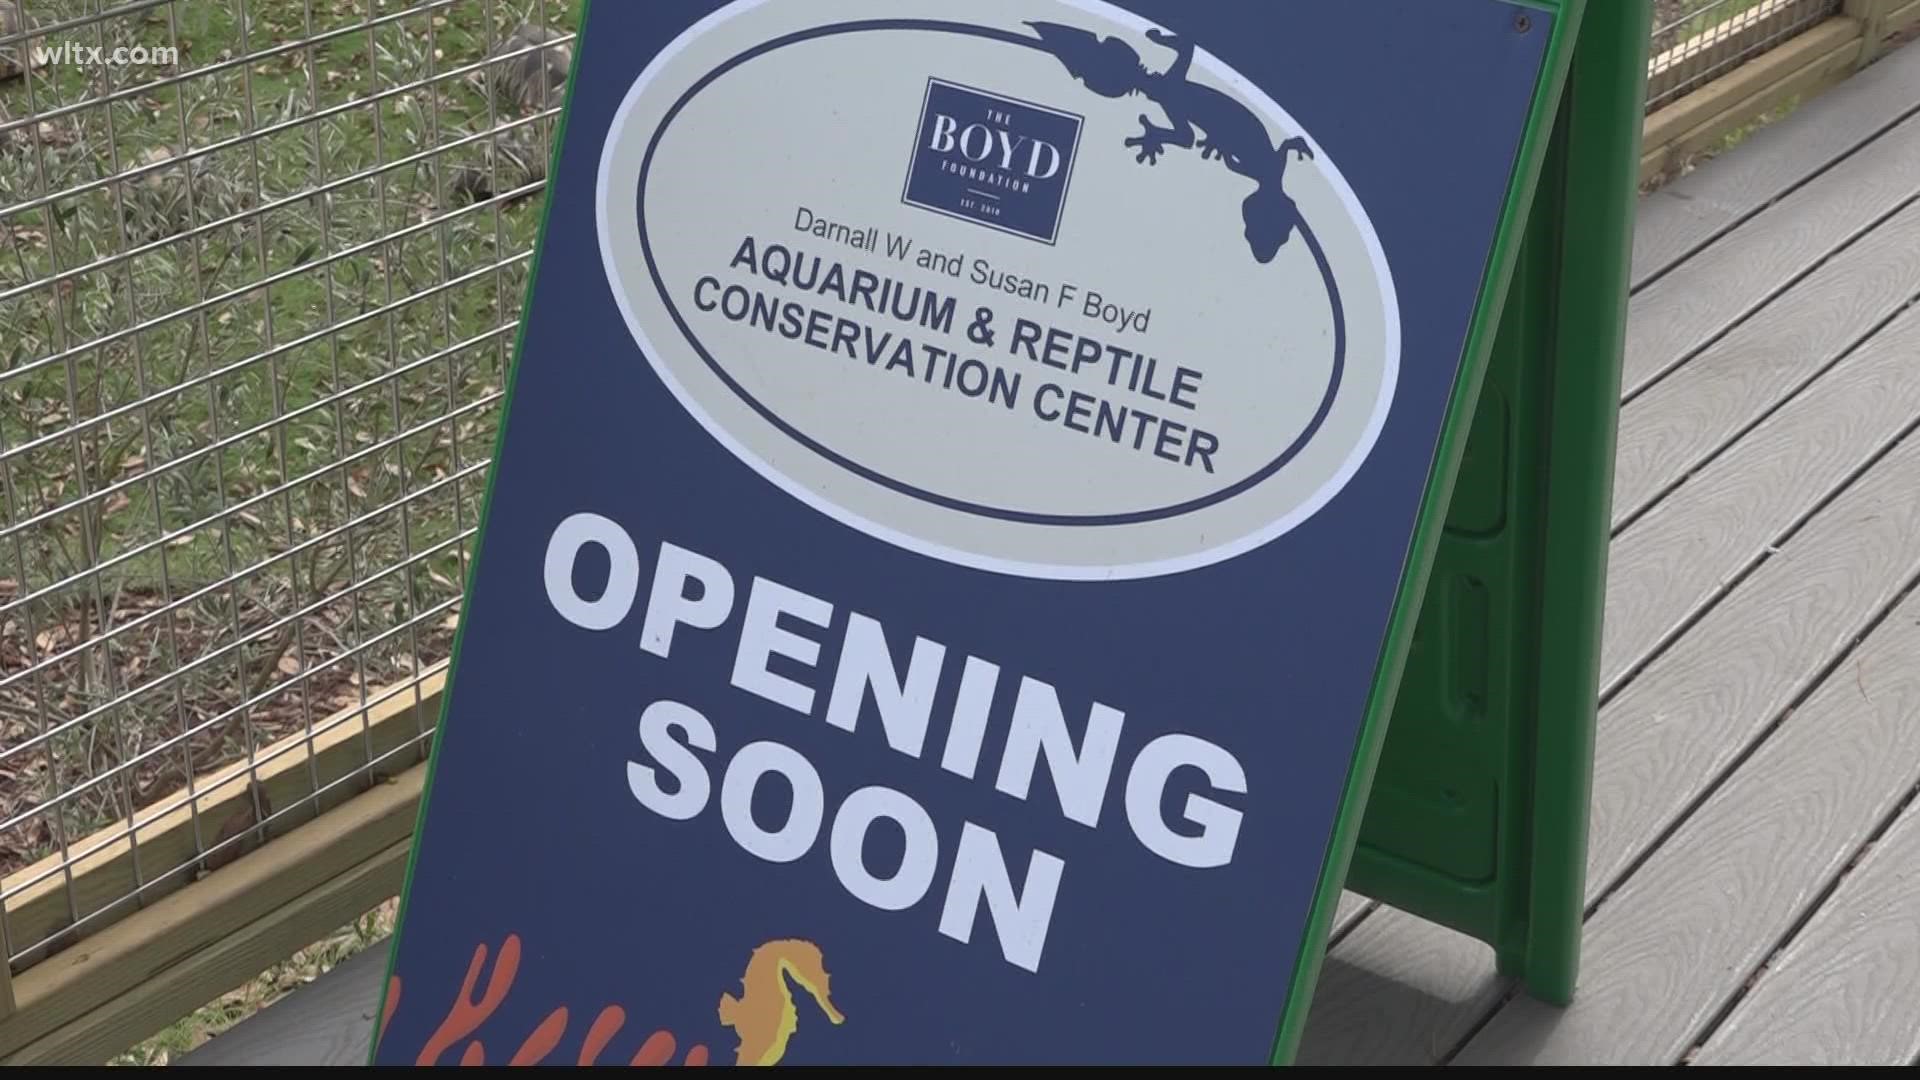 Construction of a brand new Aquarium and Reptile Conservation Center is underway at the Riverbanks Zoo.